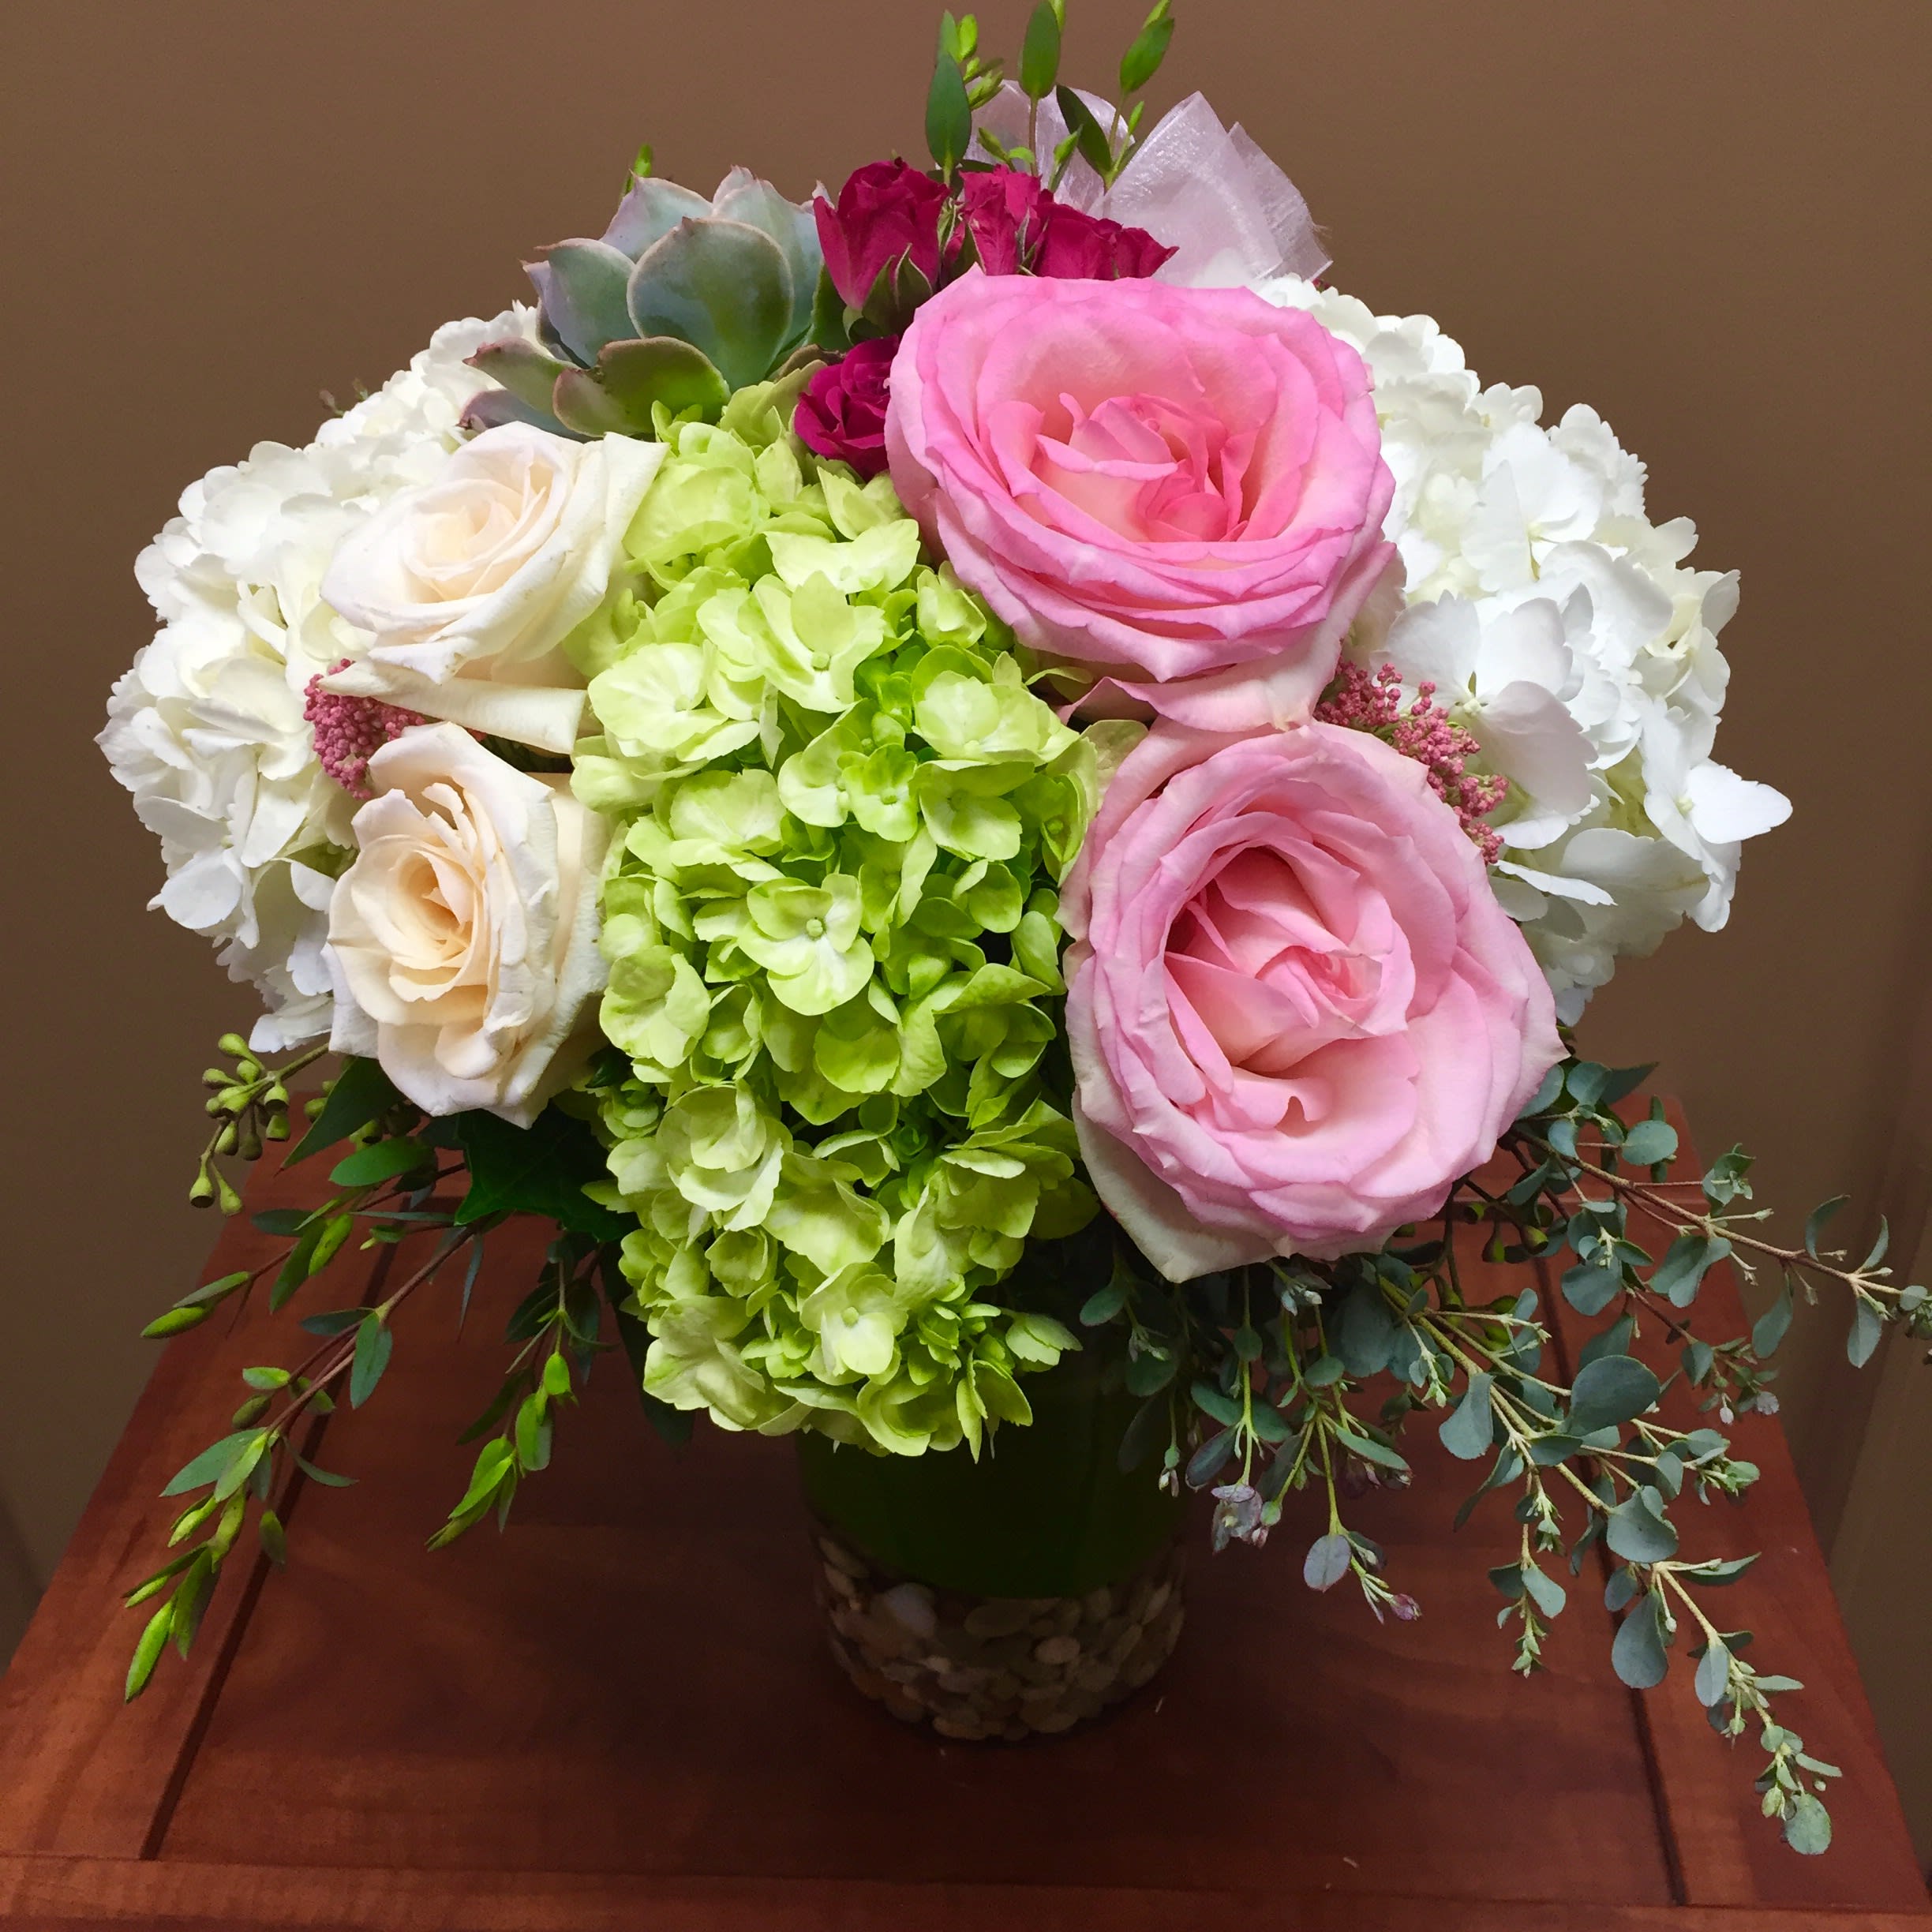 Blush Couture - Who wouldn't melt over this luscious bouquet! Make a statement with this chic design of hydrangea, roses, succulents, rice flower and California greens such as seeded eucalyptus. The classic cylinder vase is leaf lined and pebble filled for a clean and sophisticated look. 